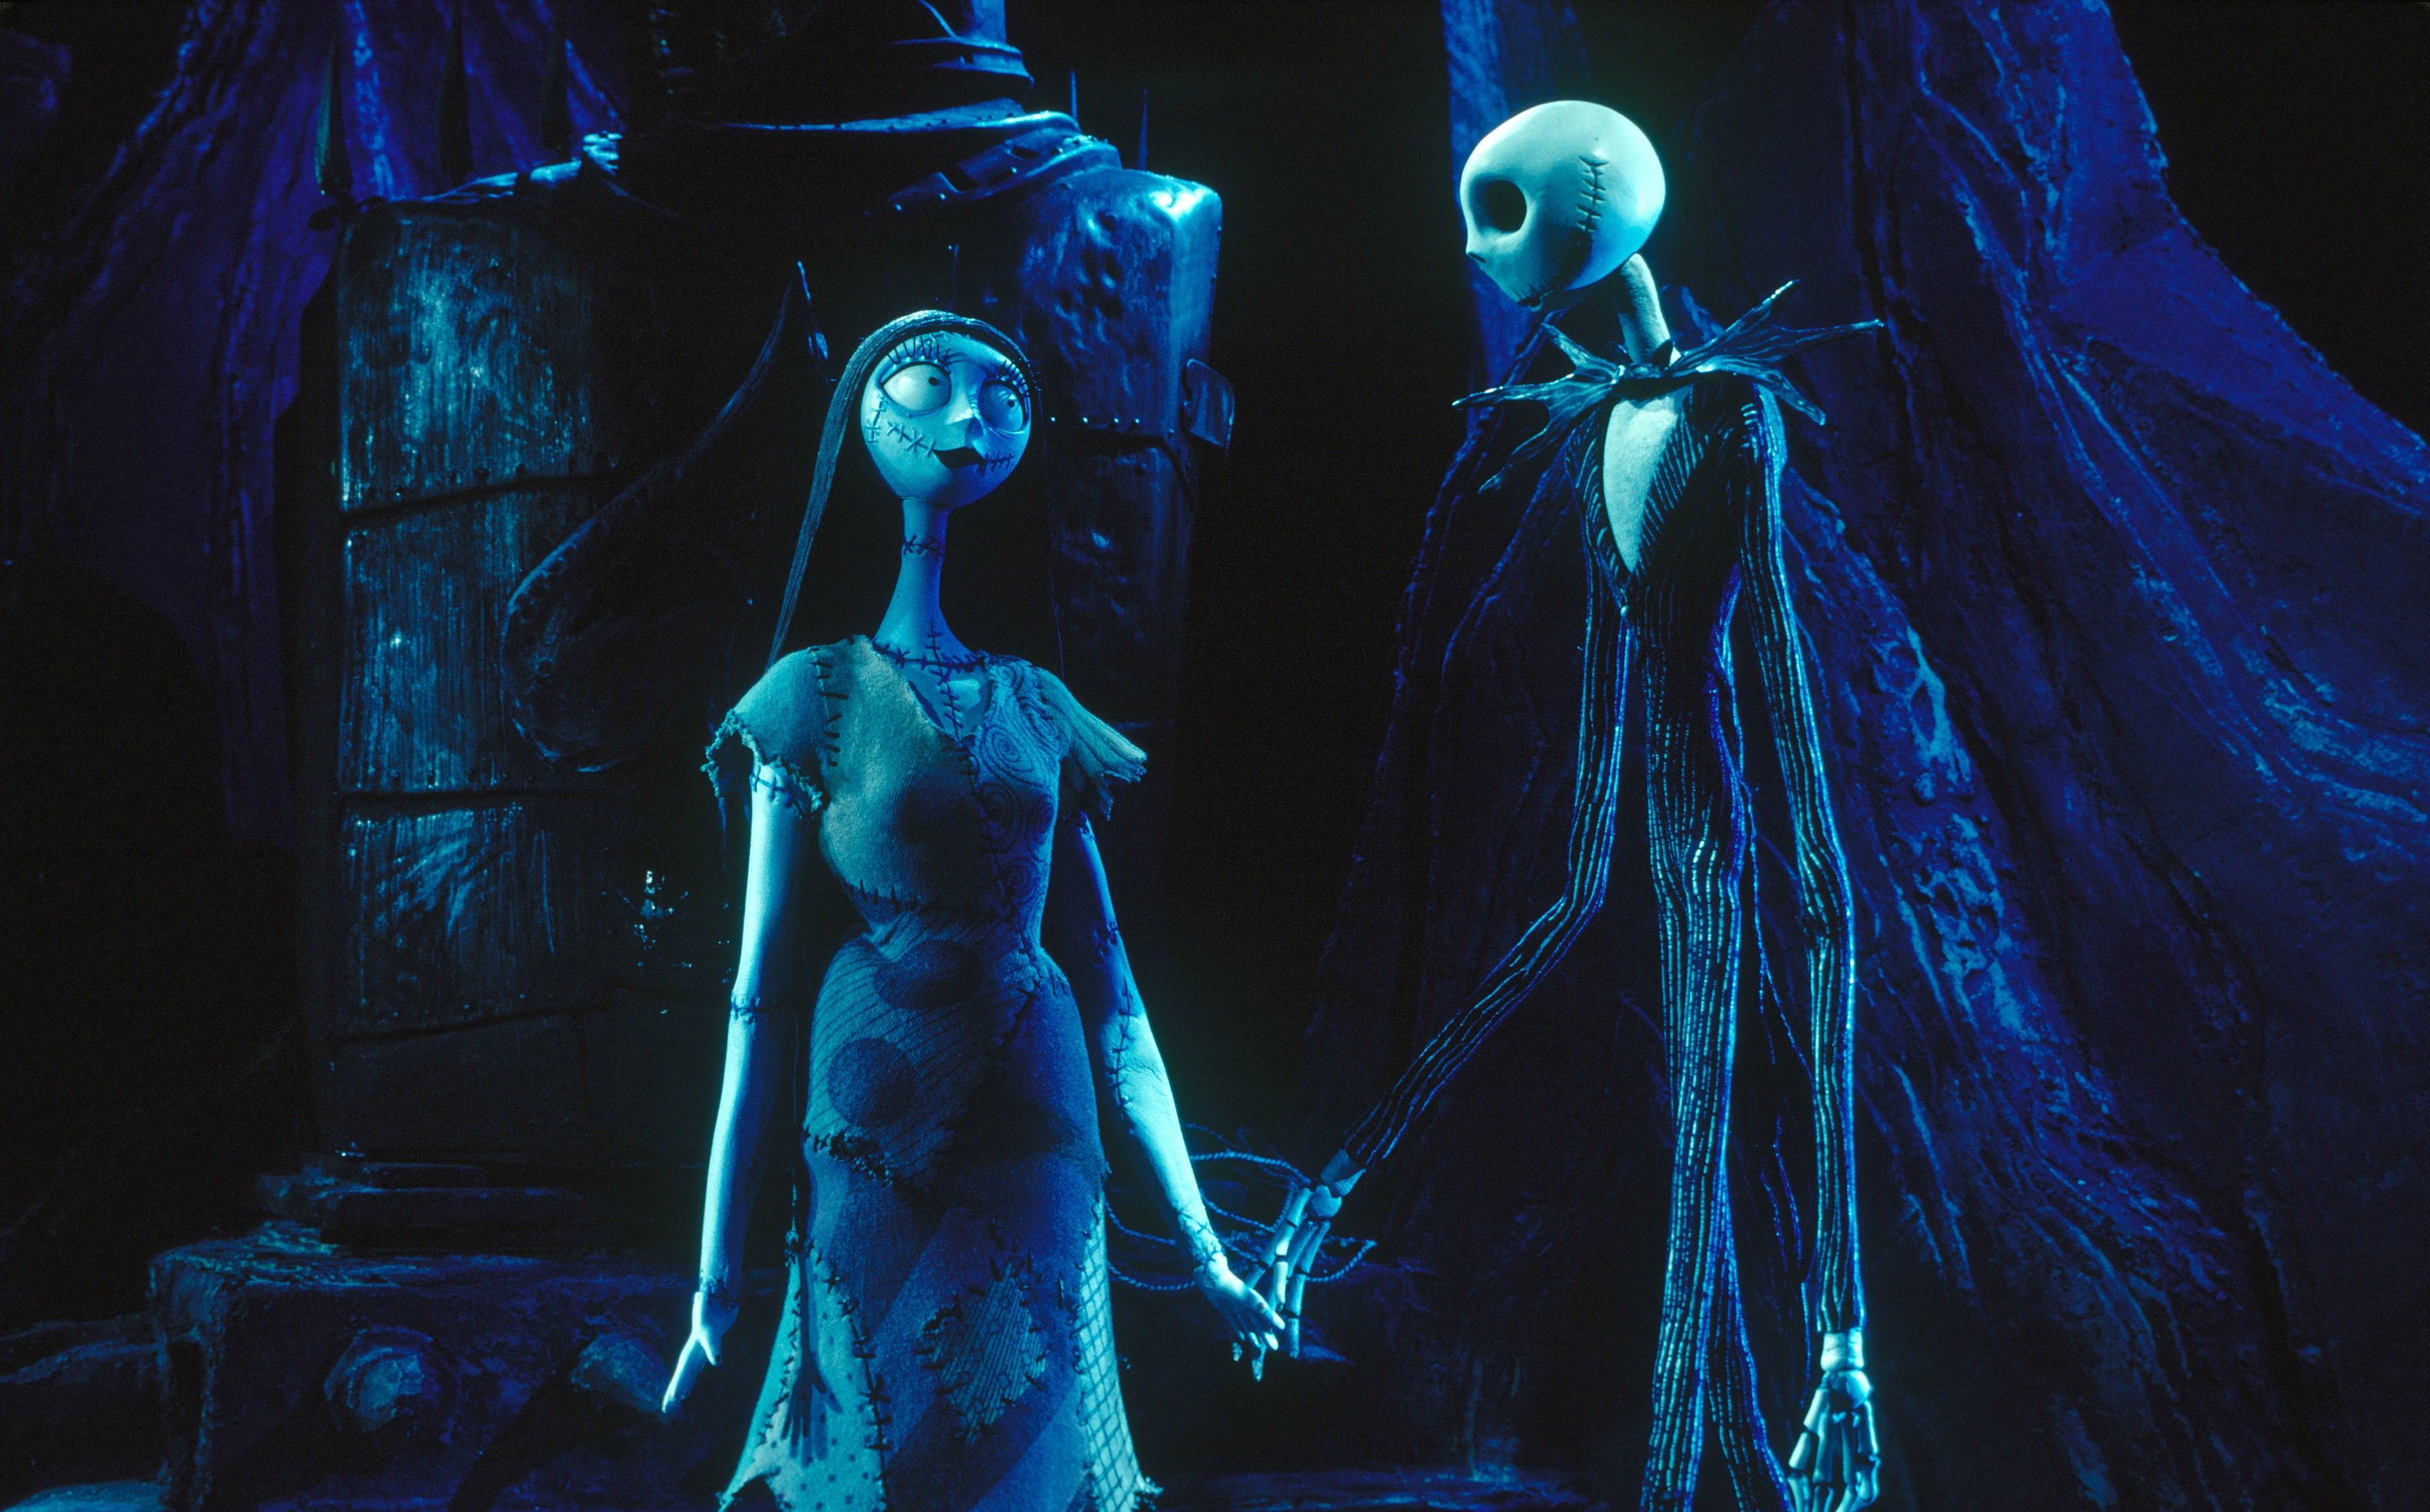 Sally and Jack Skellington from 'The Nightmare Before Christmas' holding hands